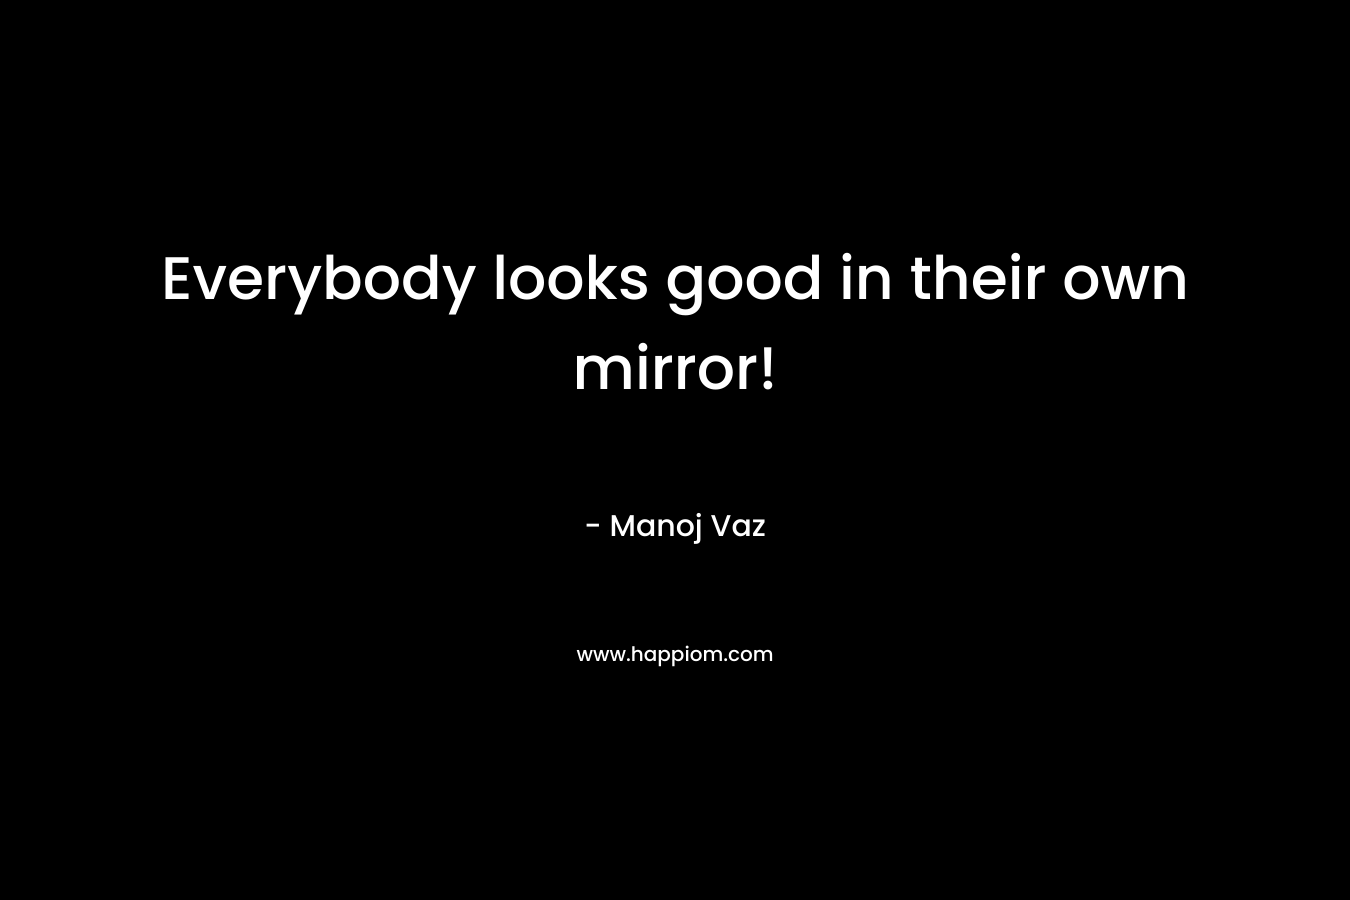 Everybody looks good in their own mirror!